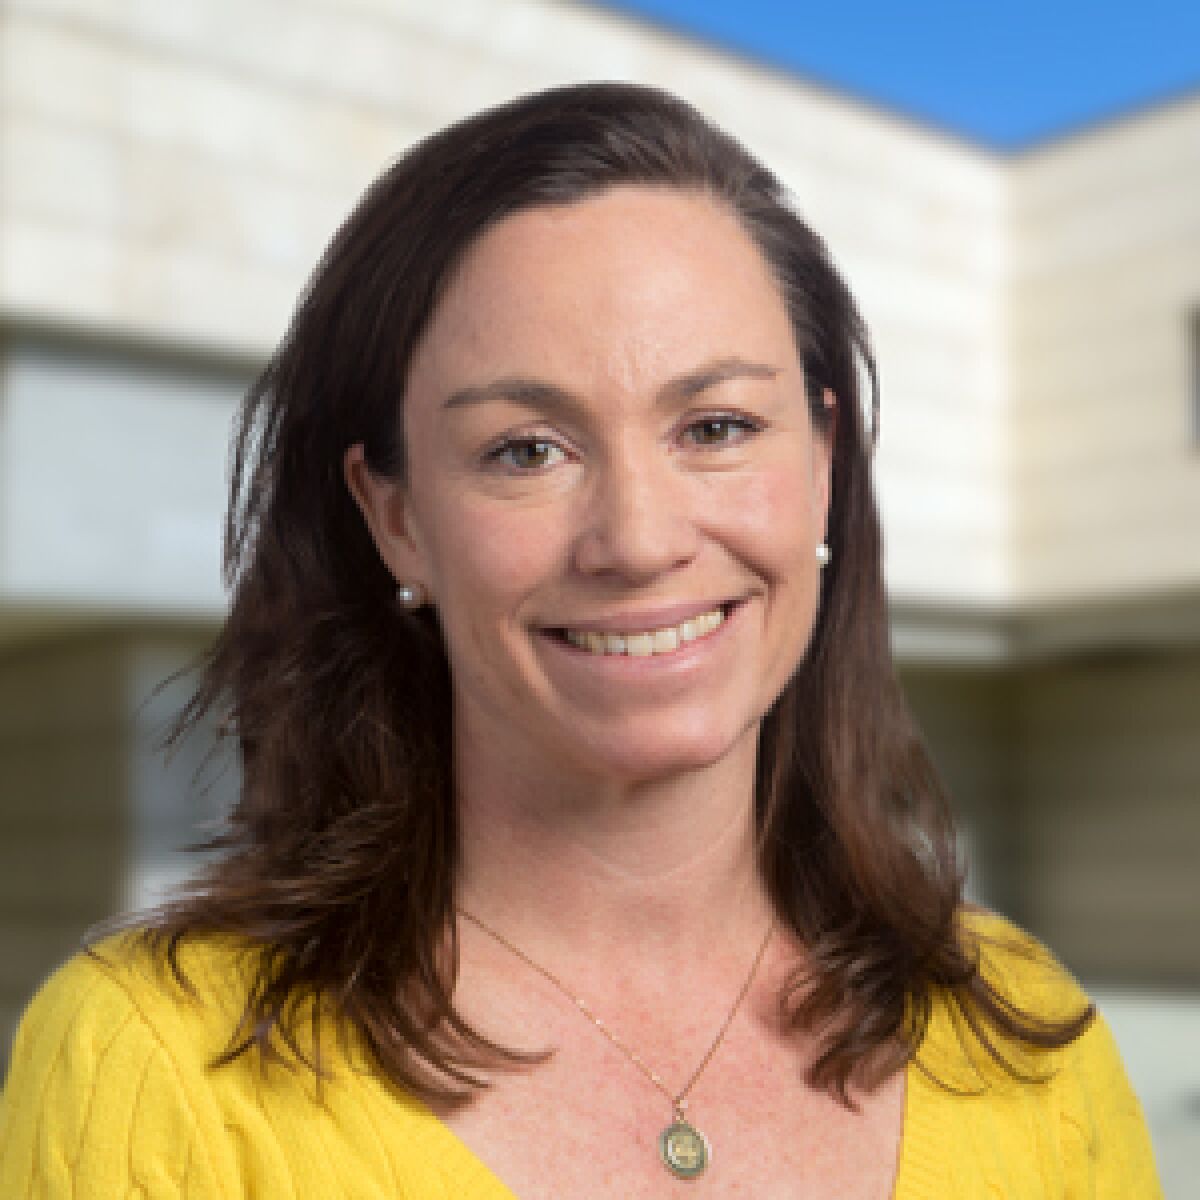 Scripps Research will present “Hacking Our Body Clocks to Optimize Health” with Katja Lamia on Wednesday, Oct. 19, online.